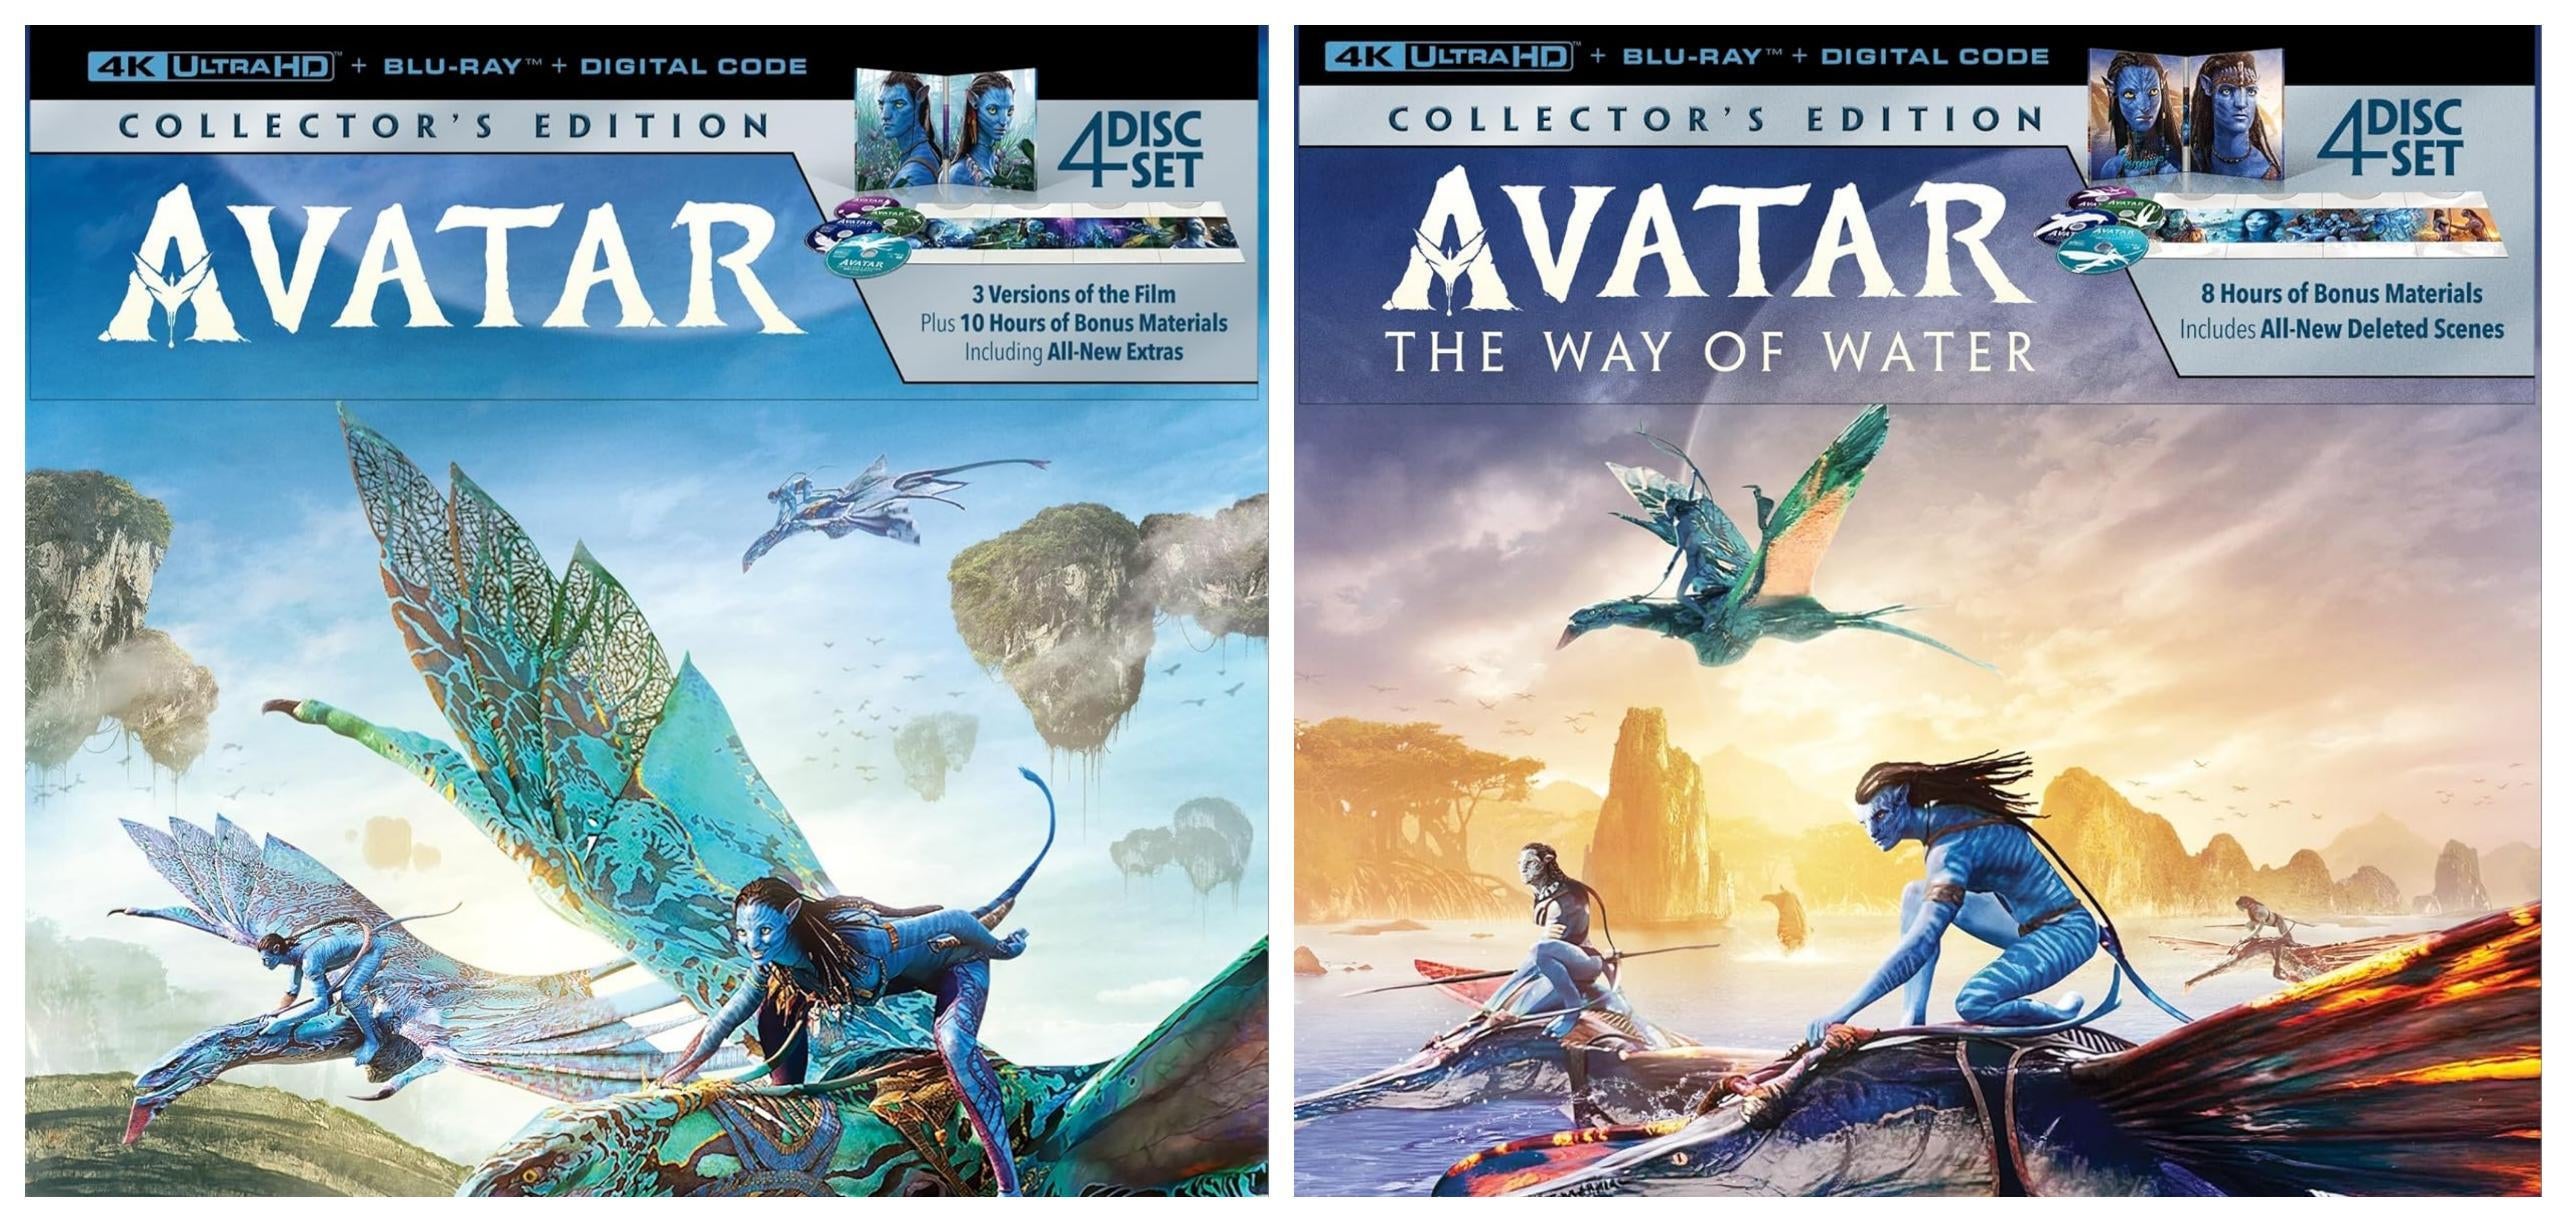 The Original Avatar and Avatar: The Way of Water Get 4K Blu-ray Collector's  Editions